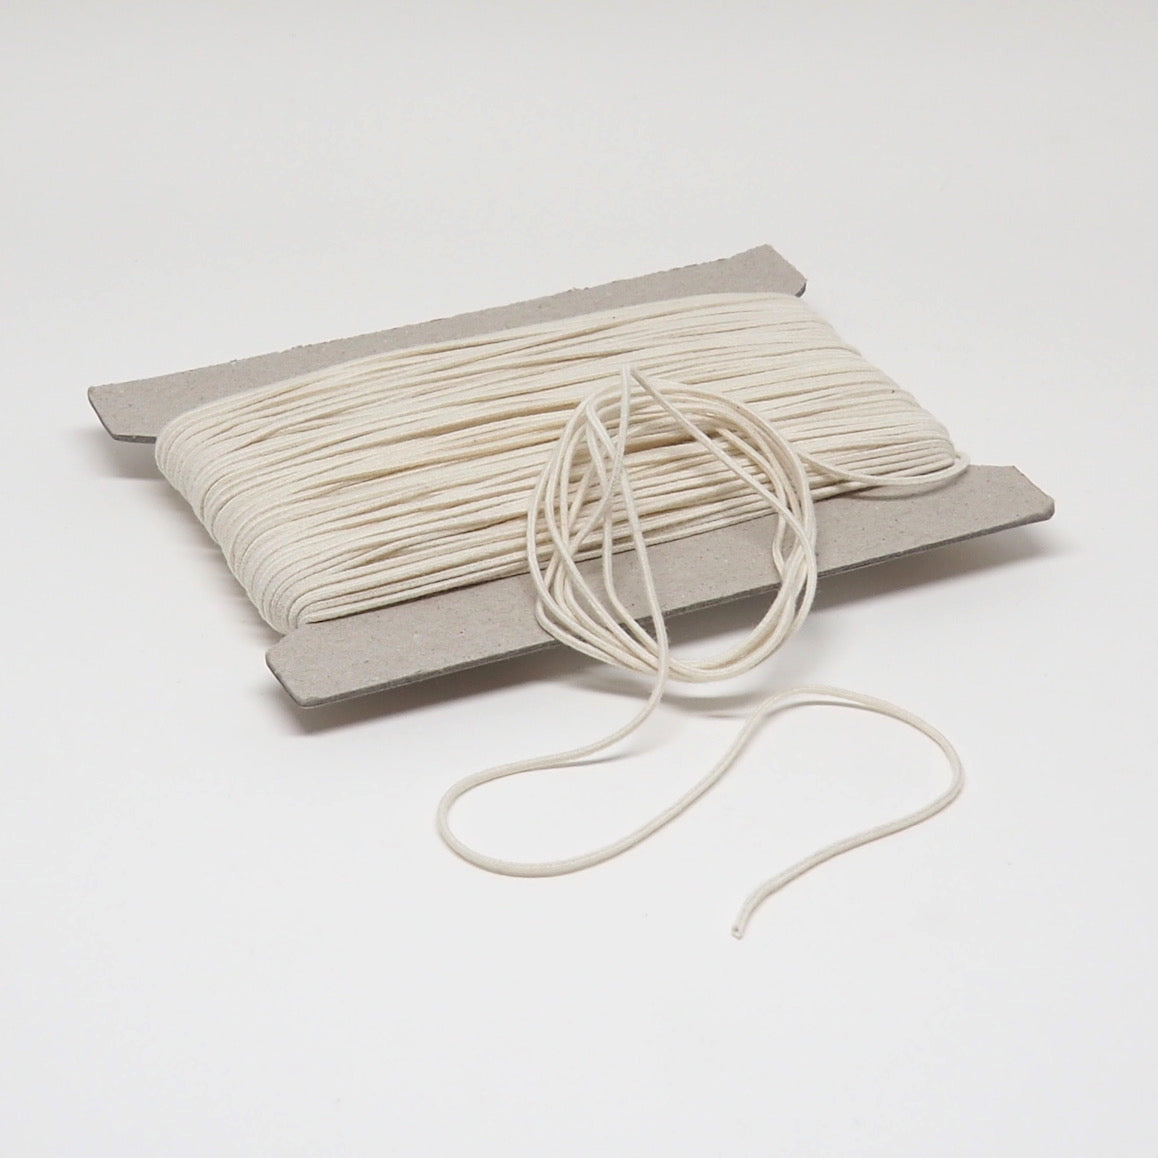 ORGANIC COTTON ELASTIC CORD - 1.1mm - NATURAL UN-DYED